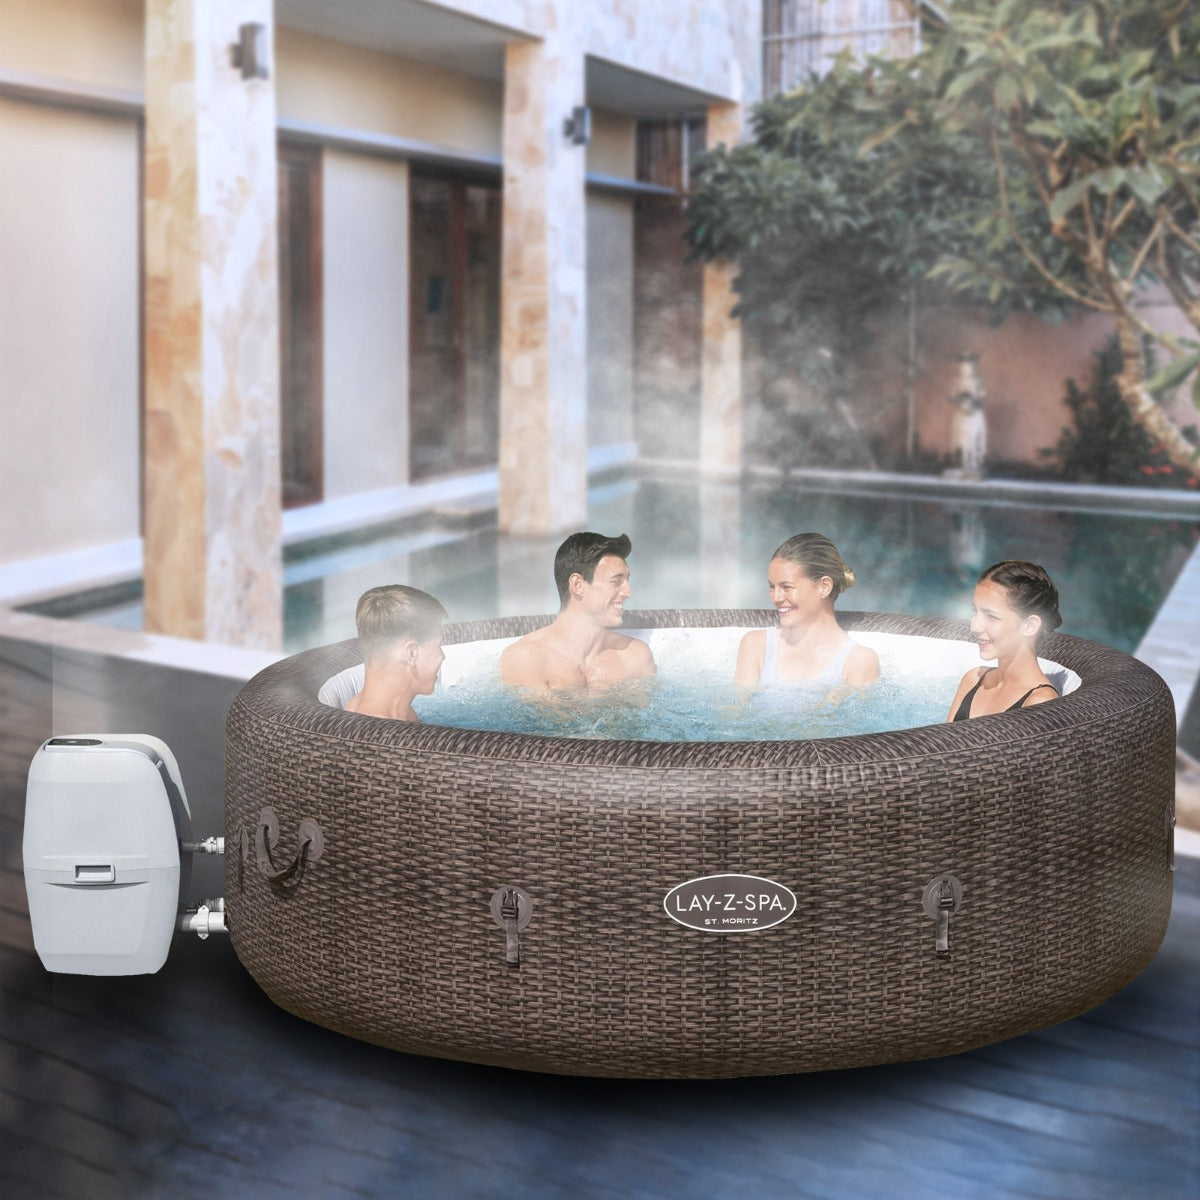 Gigantic! Bestway Heated Lay | St. Z Hot Spa Moritz Outbax Tub